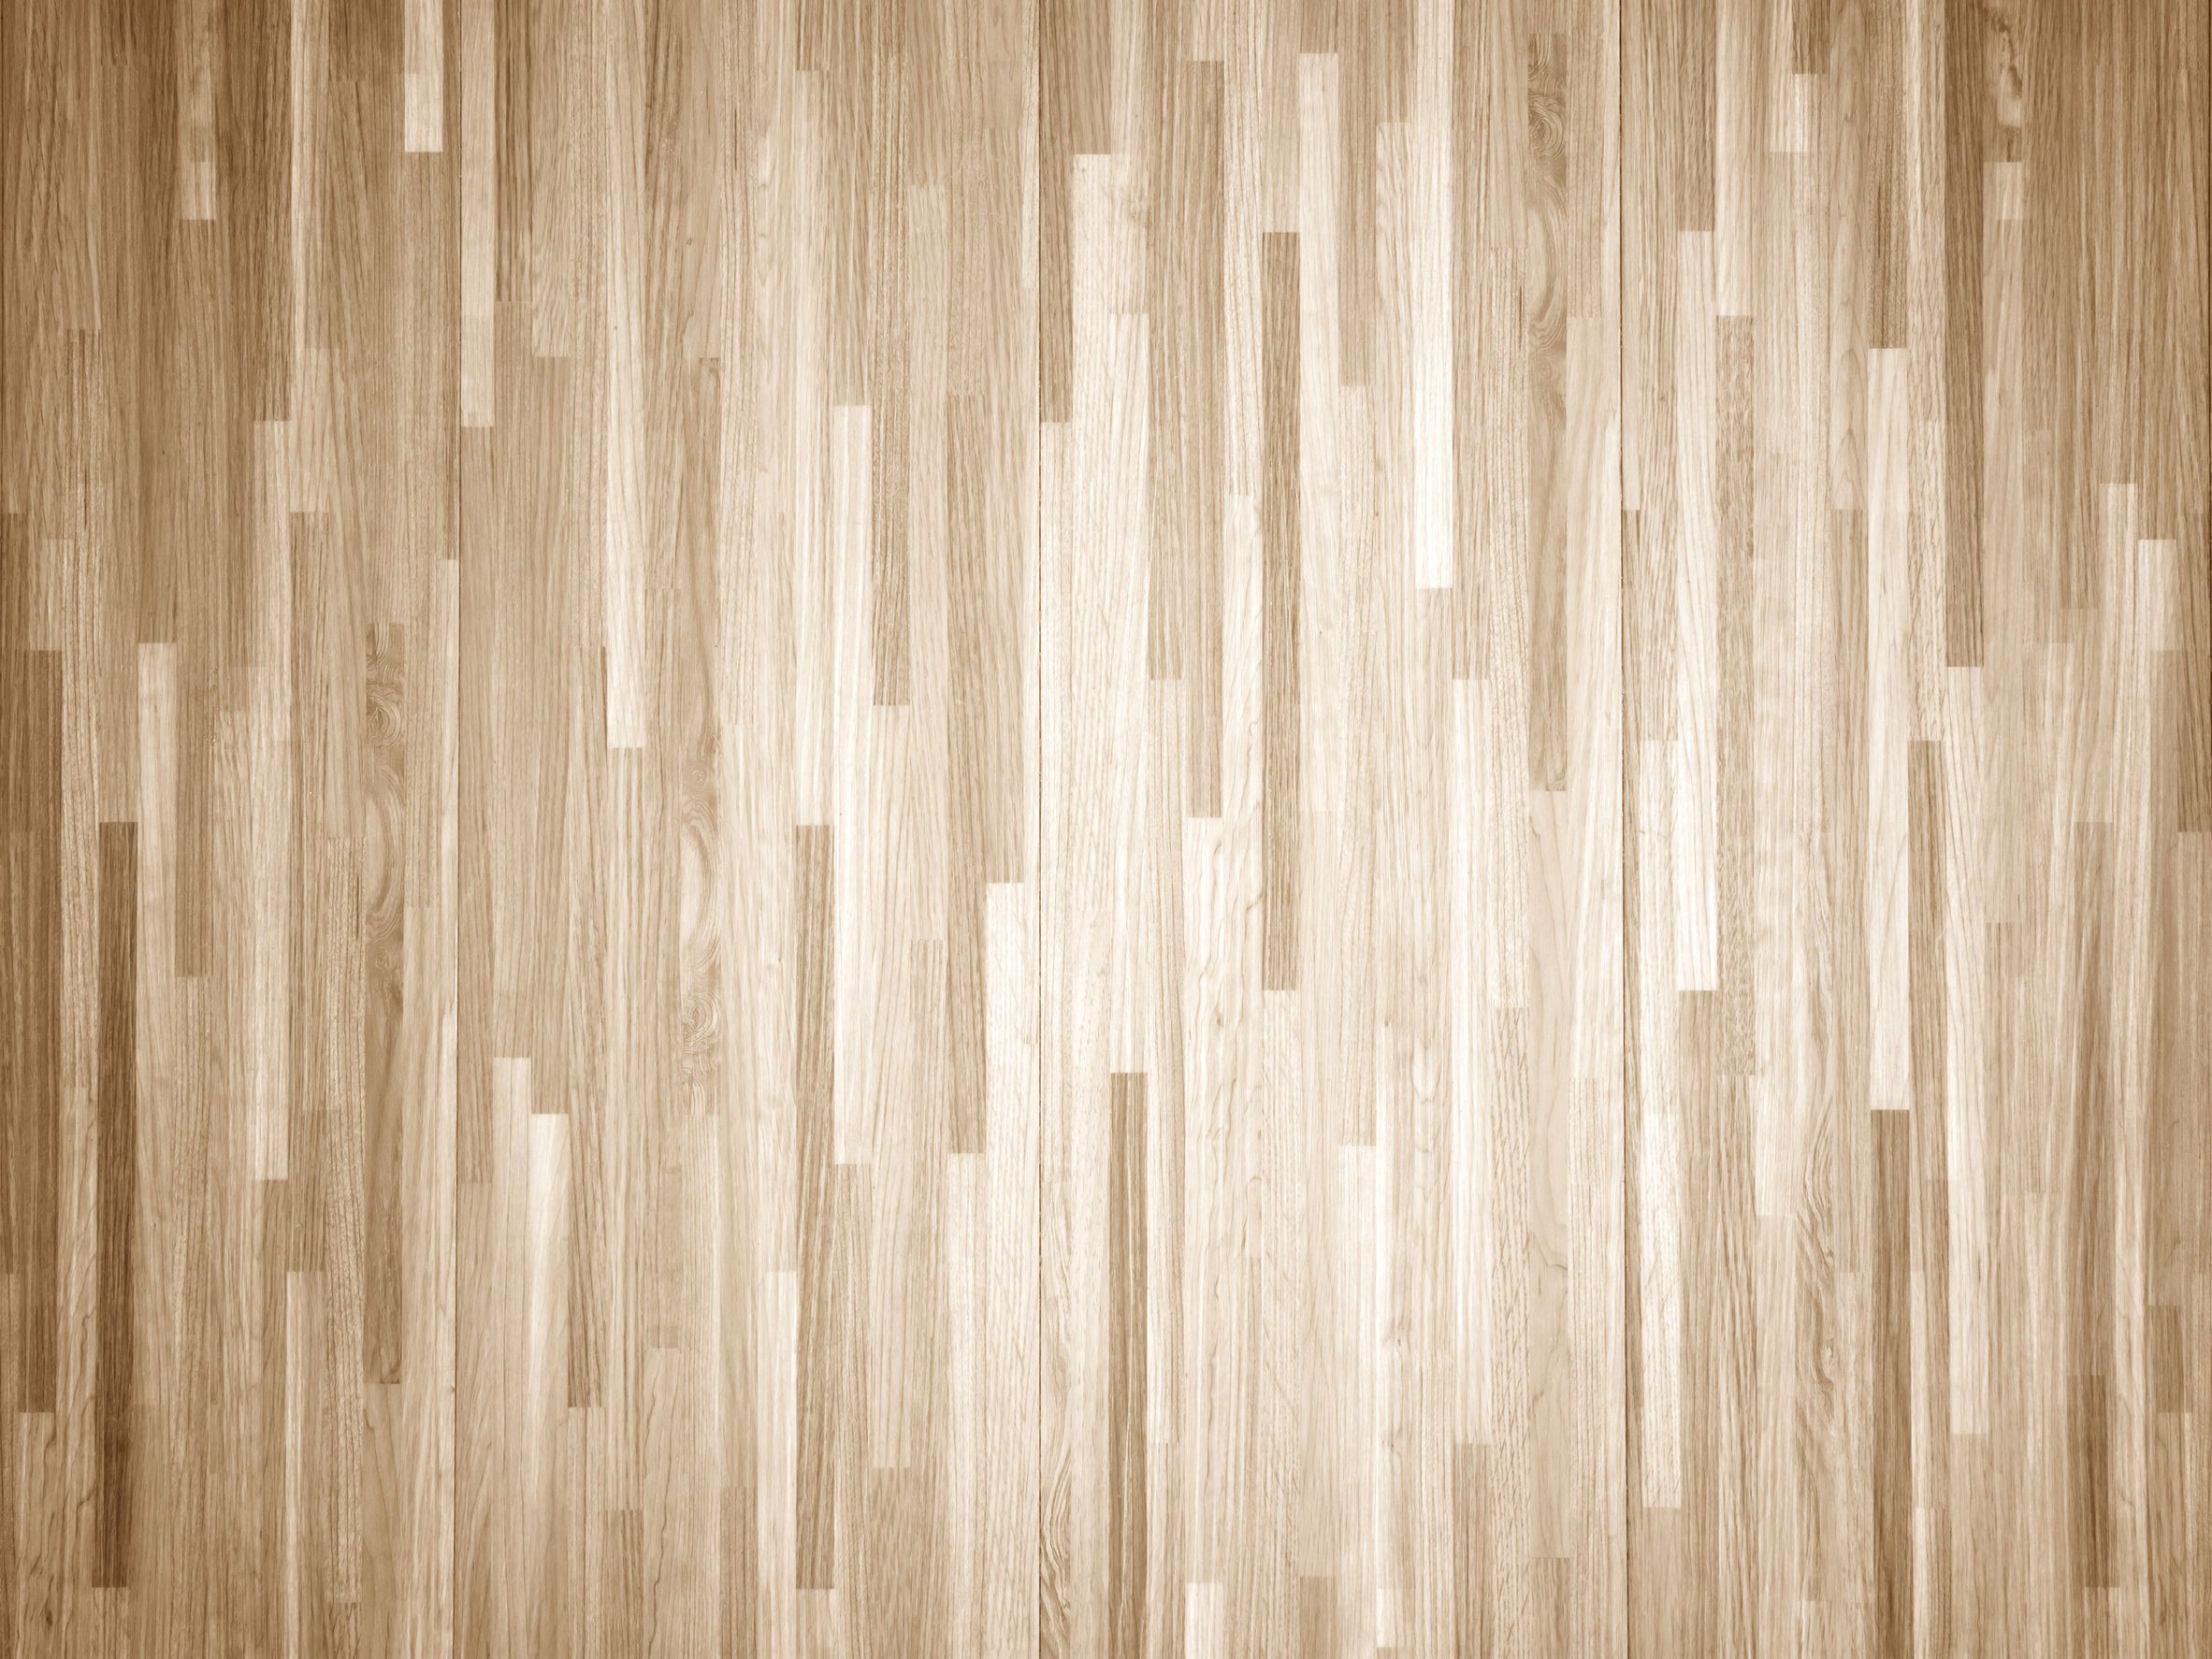 14 Recommended Hardwood Flooring Cheap Prices 2024 free download hardwood flooring cheap prices of how to chemically strip wood floors woodfloordoctor com in you